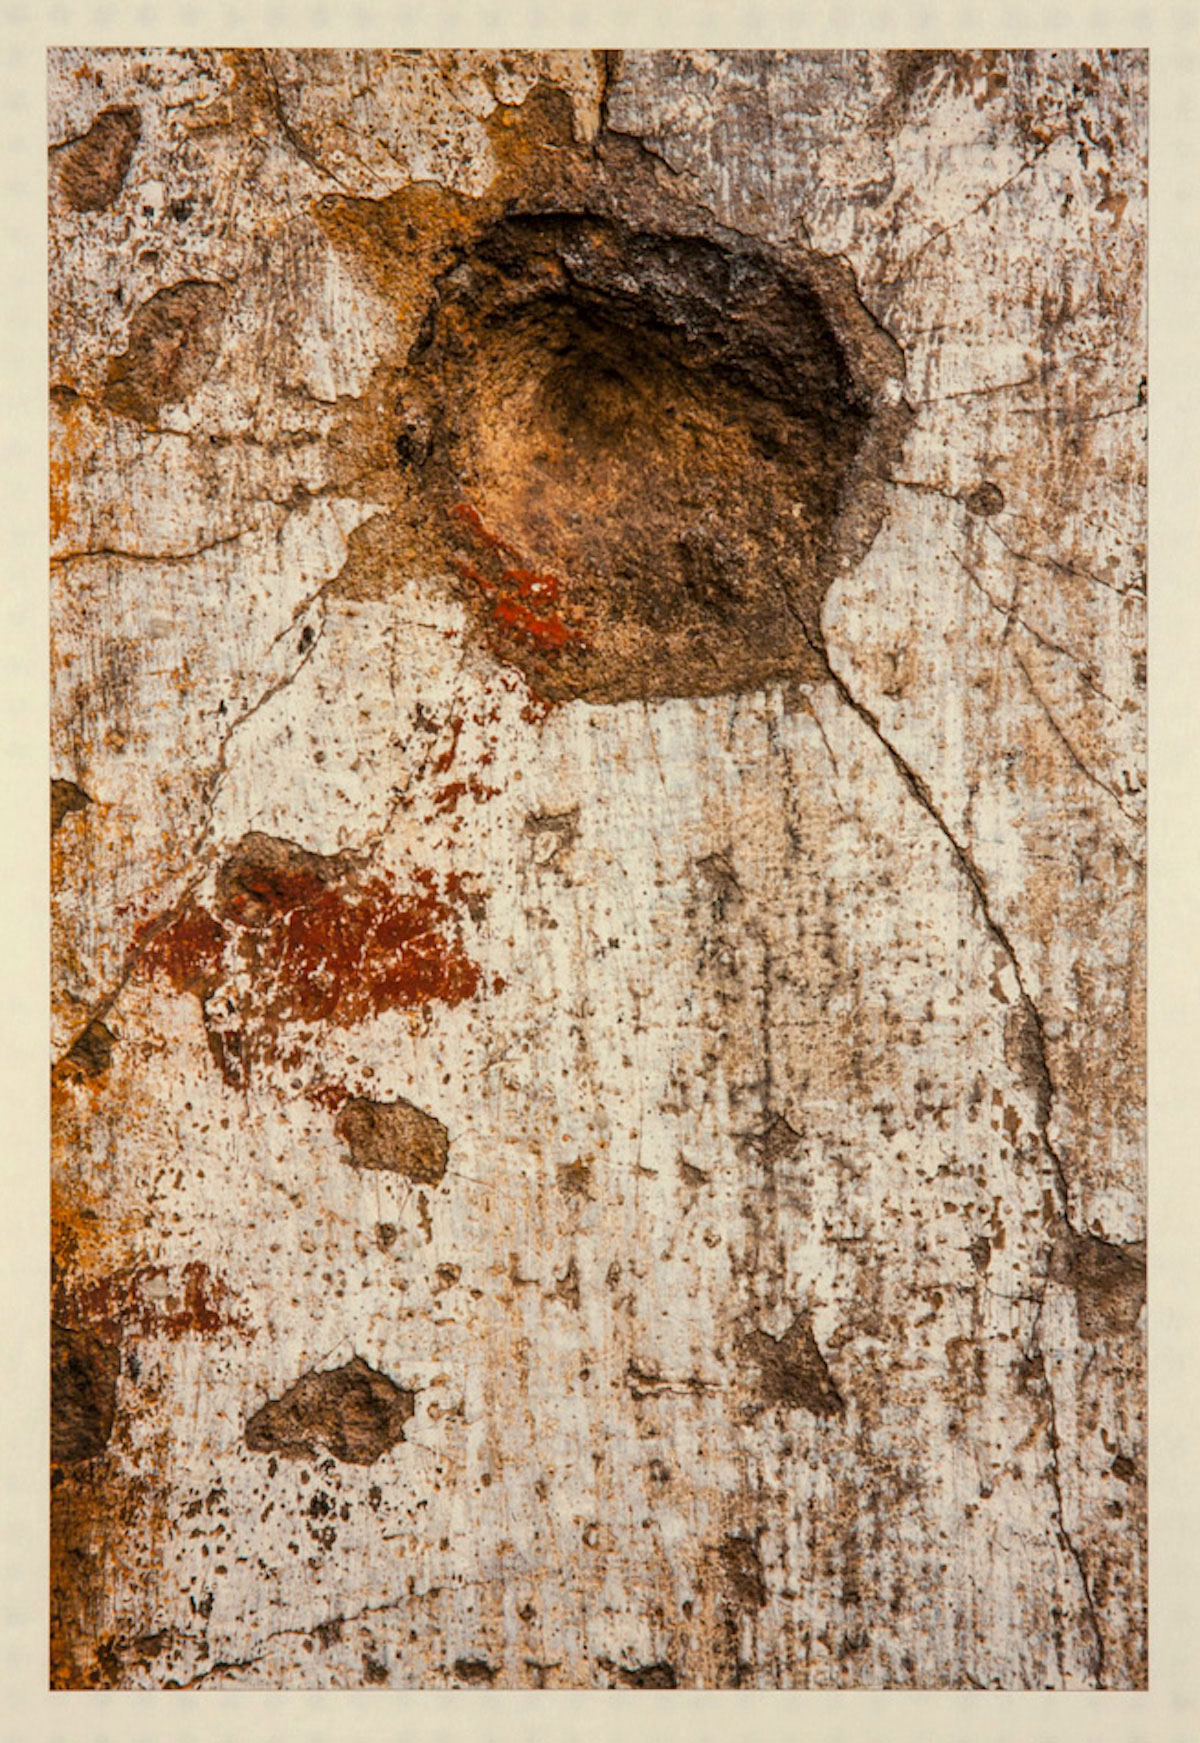 Photograph of a piece of wood or part of a tree that has pits, cracks, and holes in it. The natural colors of white, yellow ochre, brown, and sienna red create the composition.